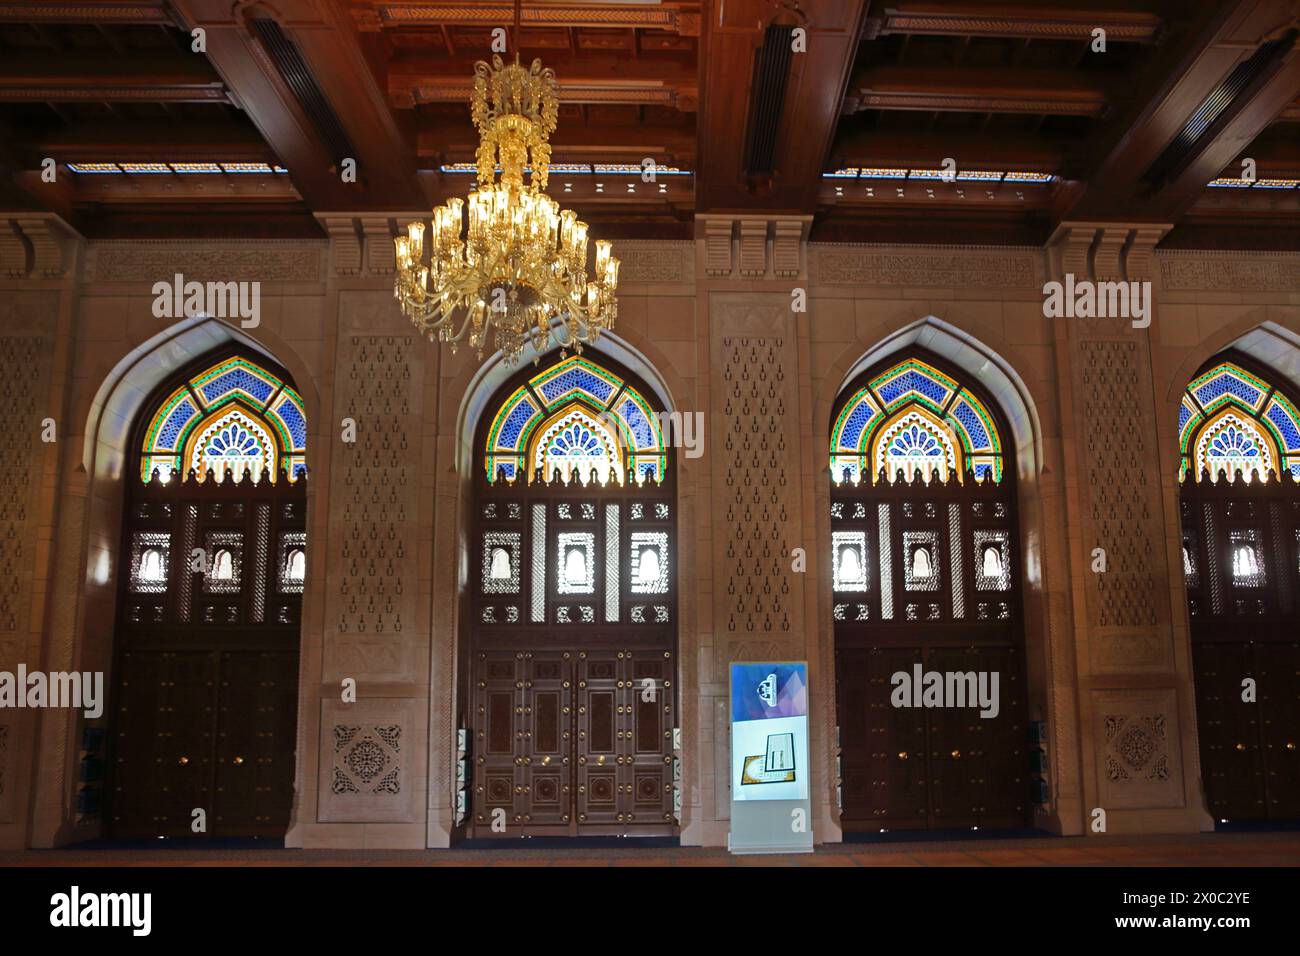 Sultan Qaboos Grand Mosque Interior of the Women's Prayer Room with Timber Omani Ceiling and Chandelier Muscat Oman Stock Photo